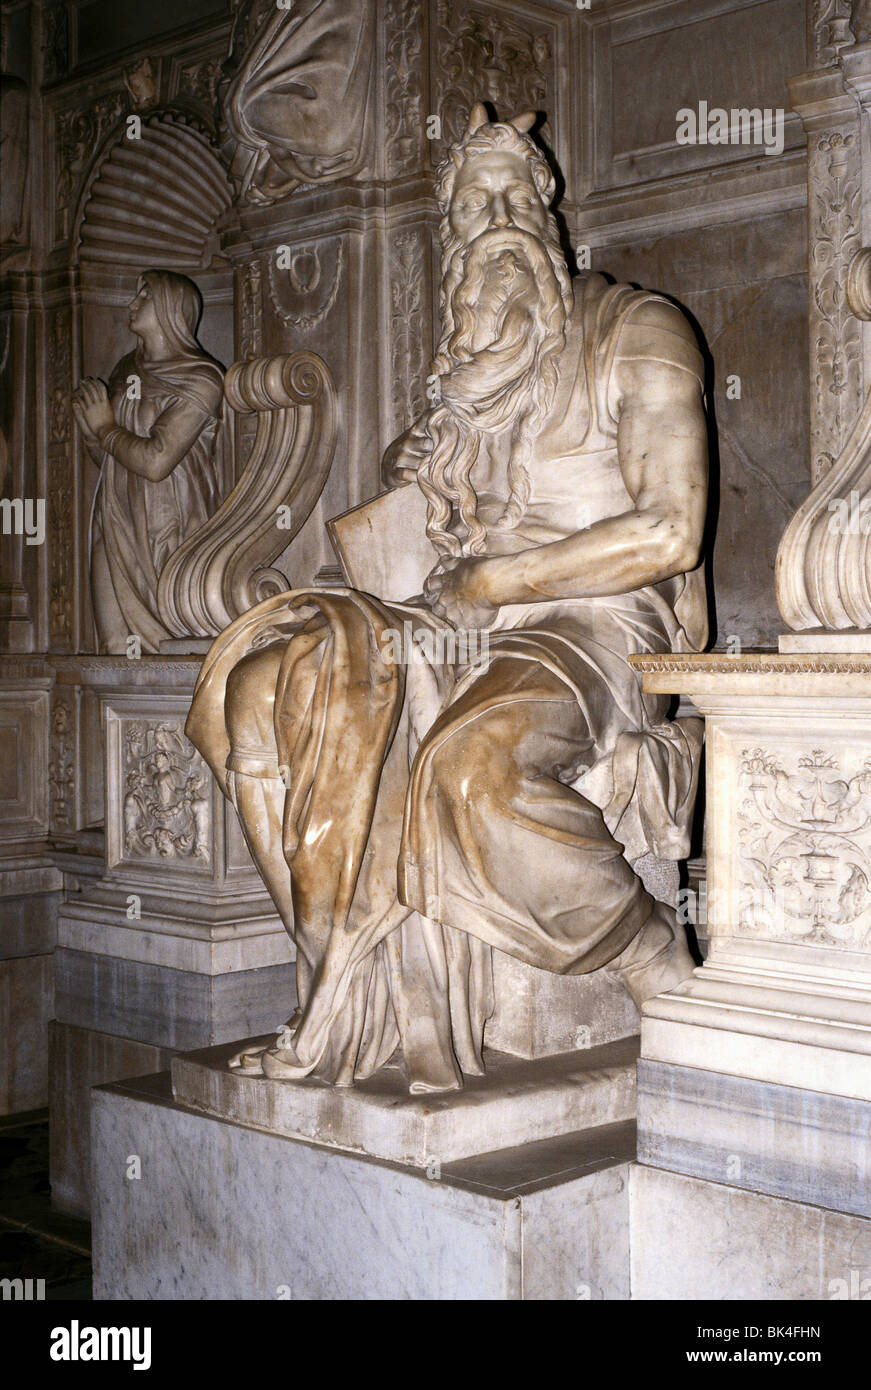 Michelangelo's 16th century sculpture of Moses at the tomb of Pope Julius II inside San Pietro in Vincoli, Rome, Italy Stock Photo